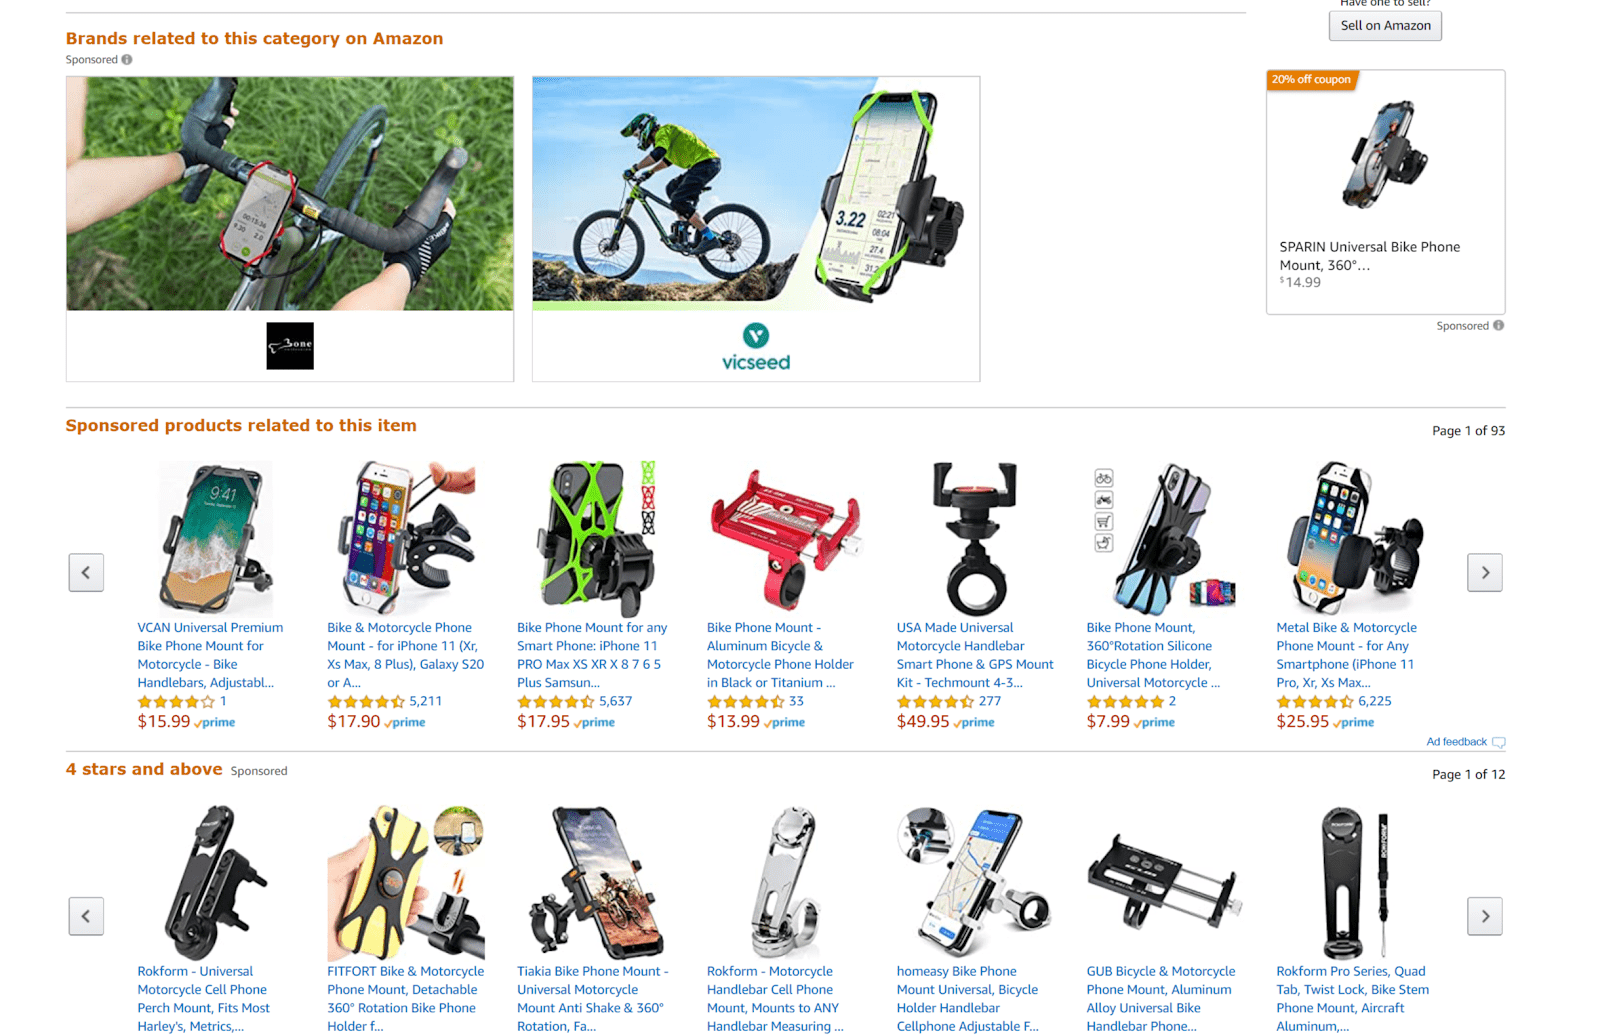 Amazon's extensive product recommendations that benefit them through affiliate links and ads